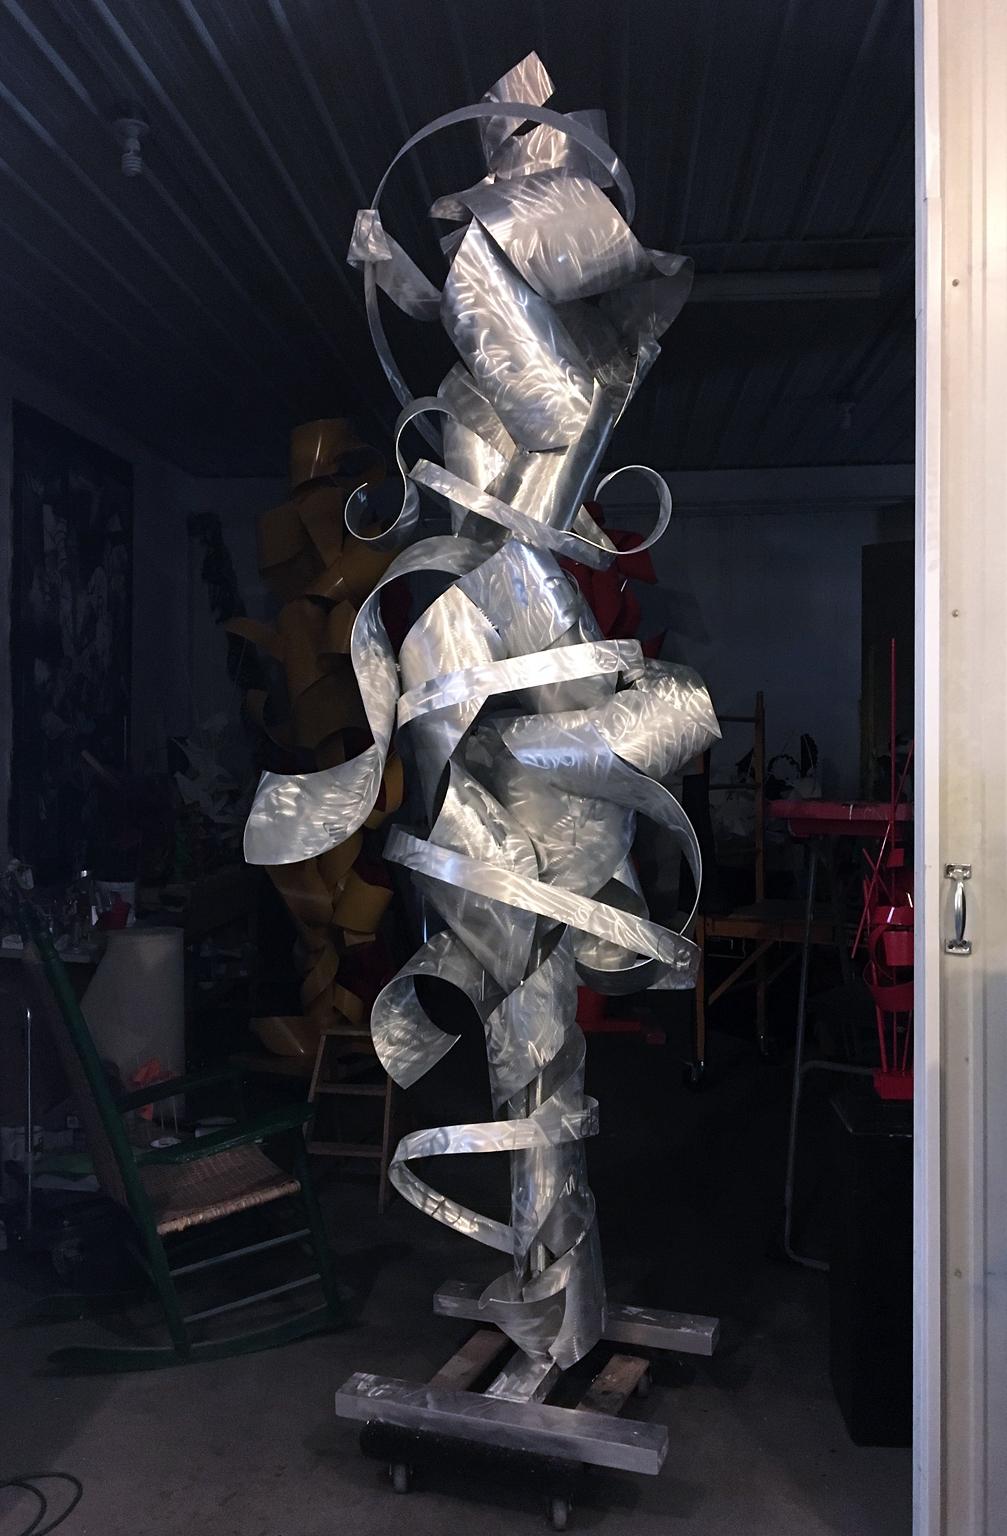 Richard Pitts Abstract Sculpture - "Gershwin" Large-Scale, Abstract Metal Sculpture in Brushed Aluminum